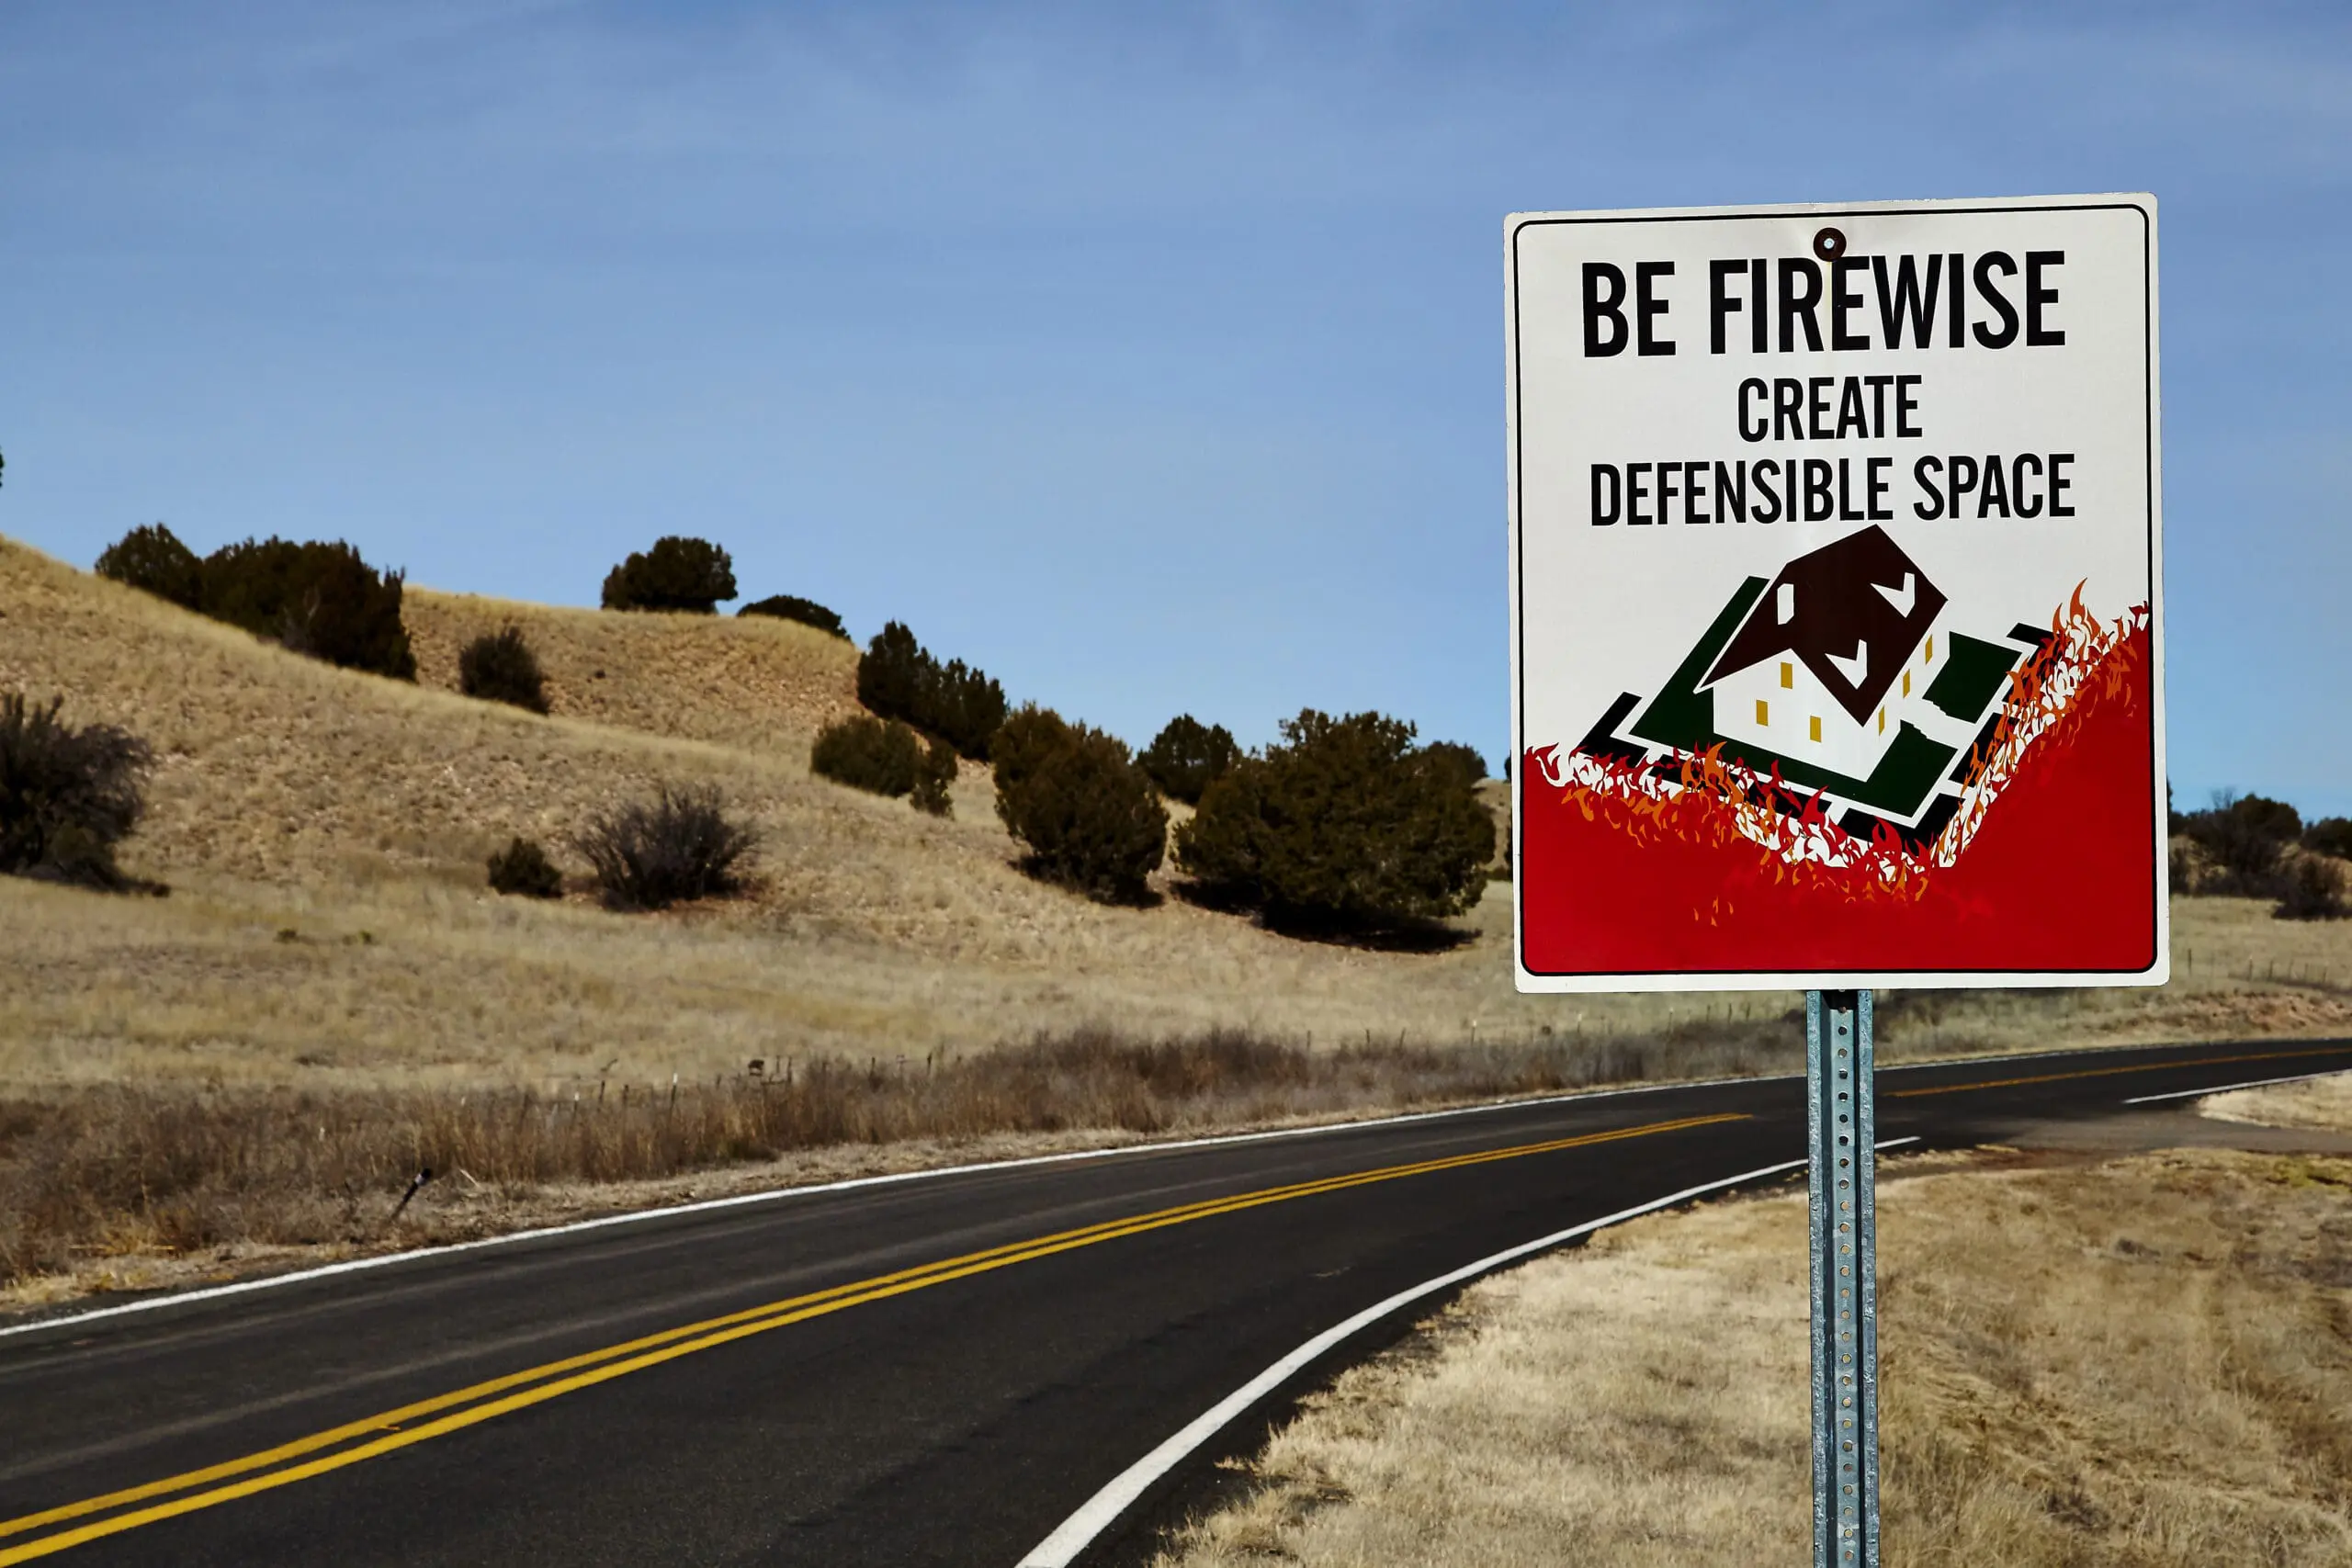 Be firewise road sign create defensible space